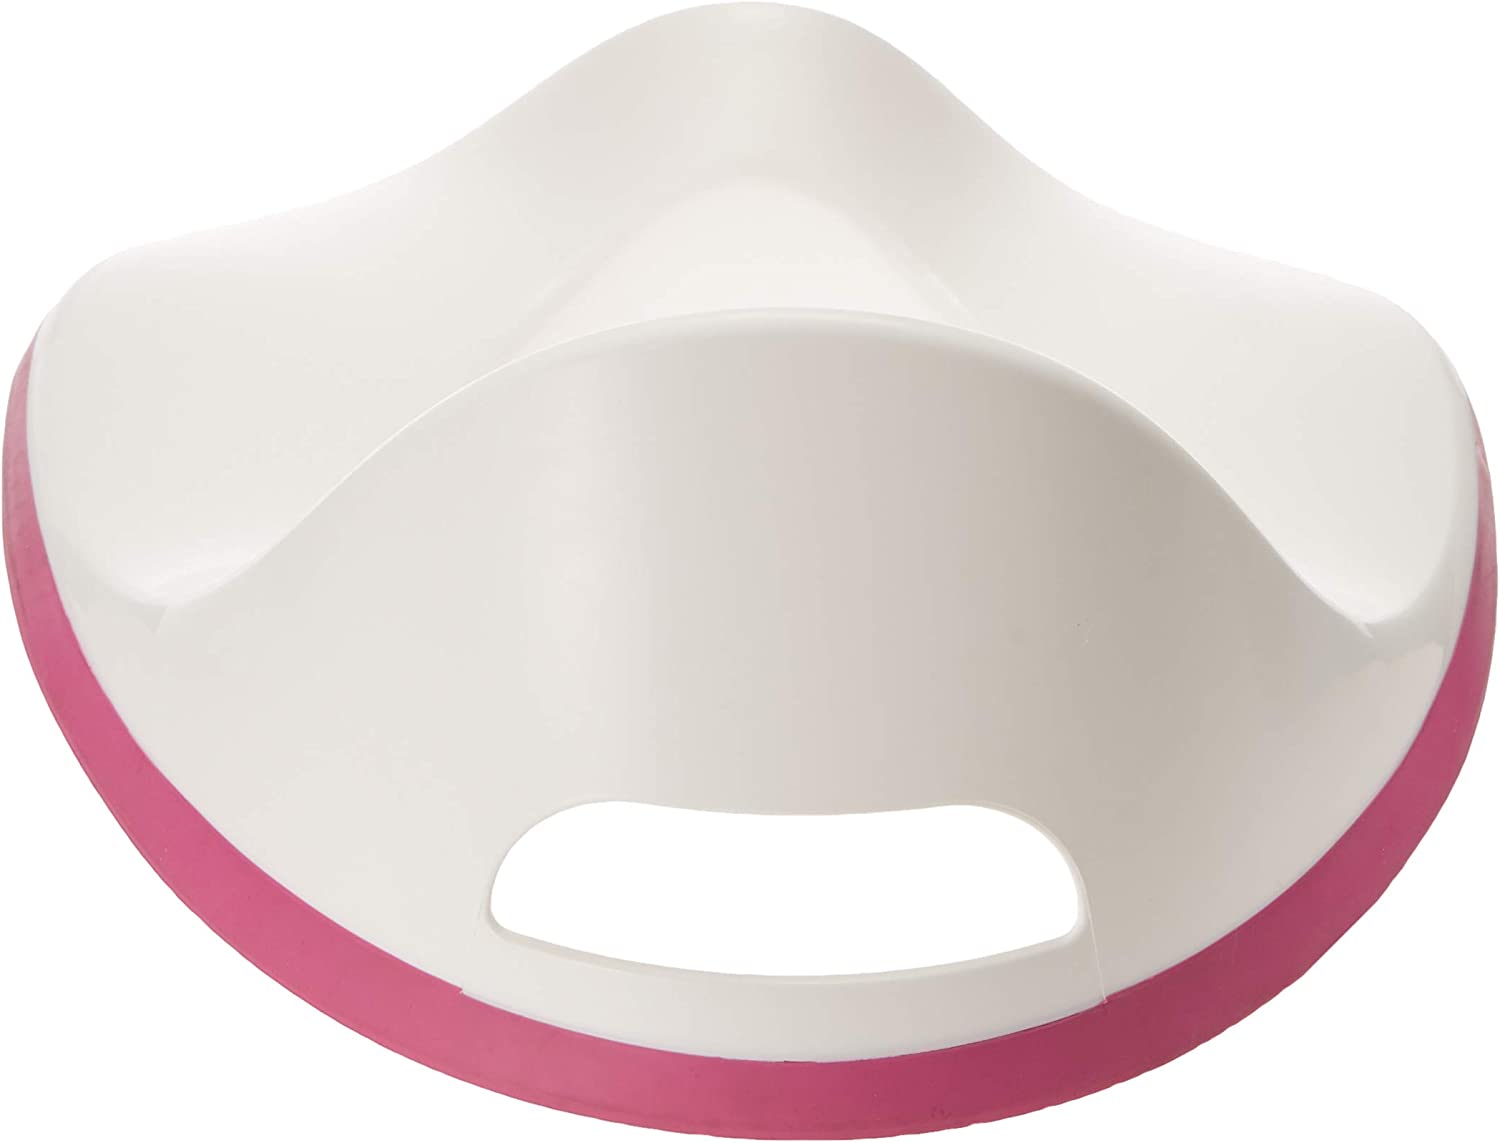 Nuk Toilet Trainer Toilet Seat for Children with Splash Guard/Berry - 7103